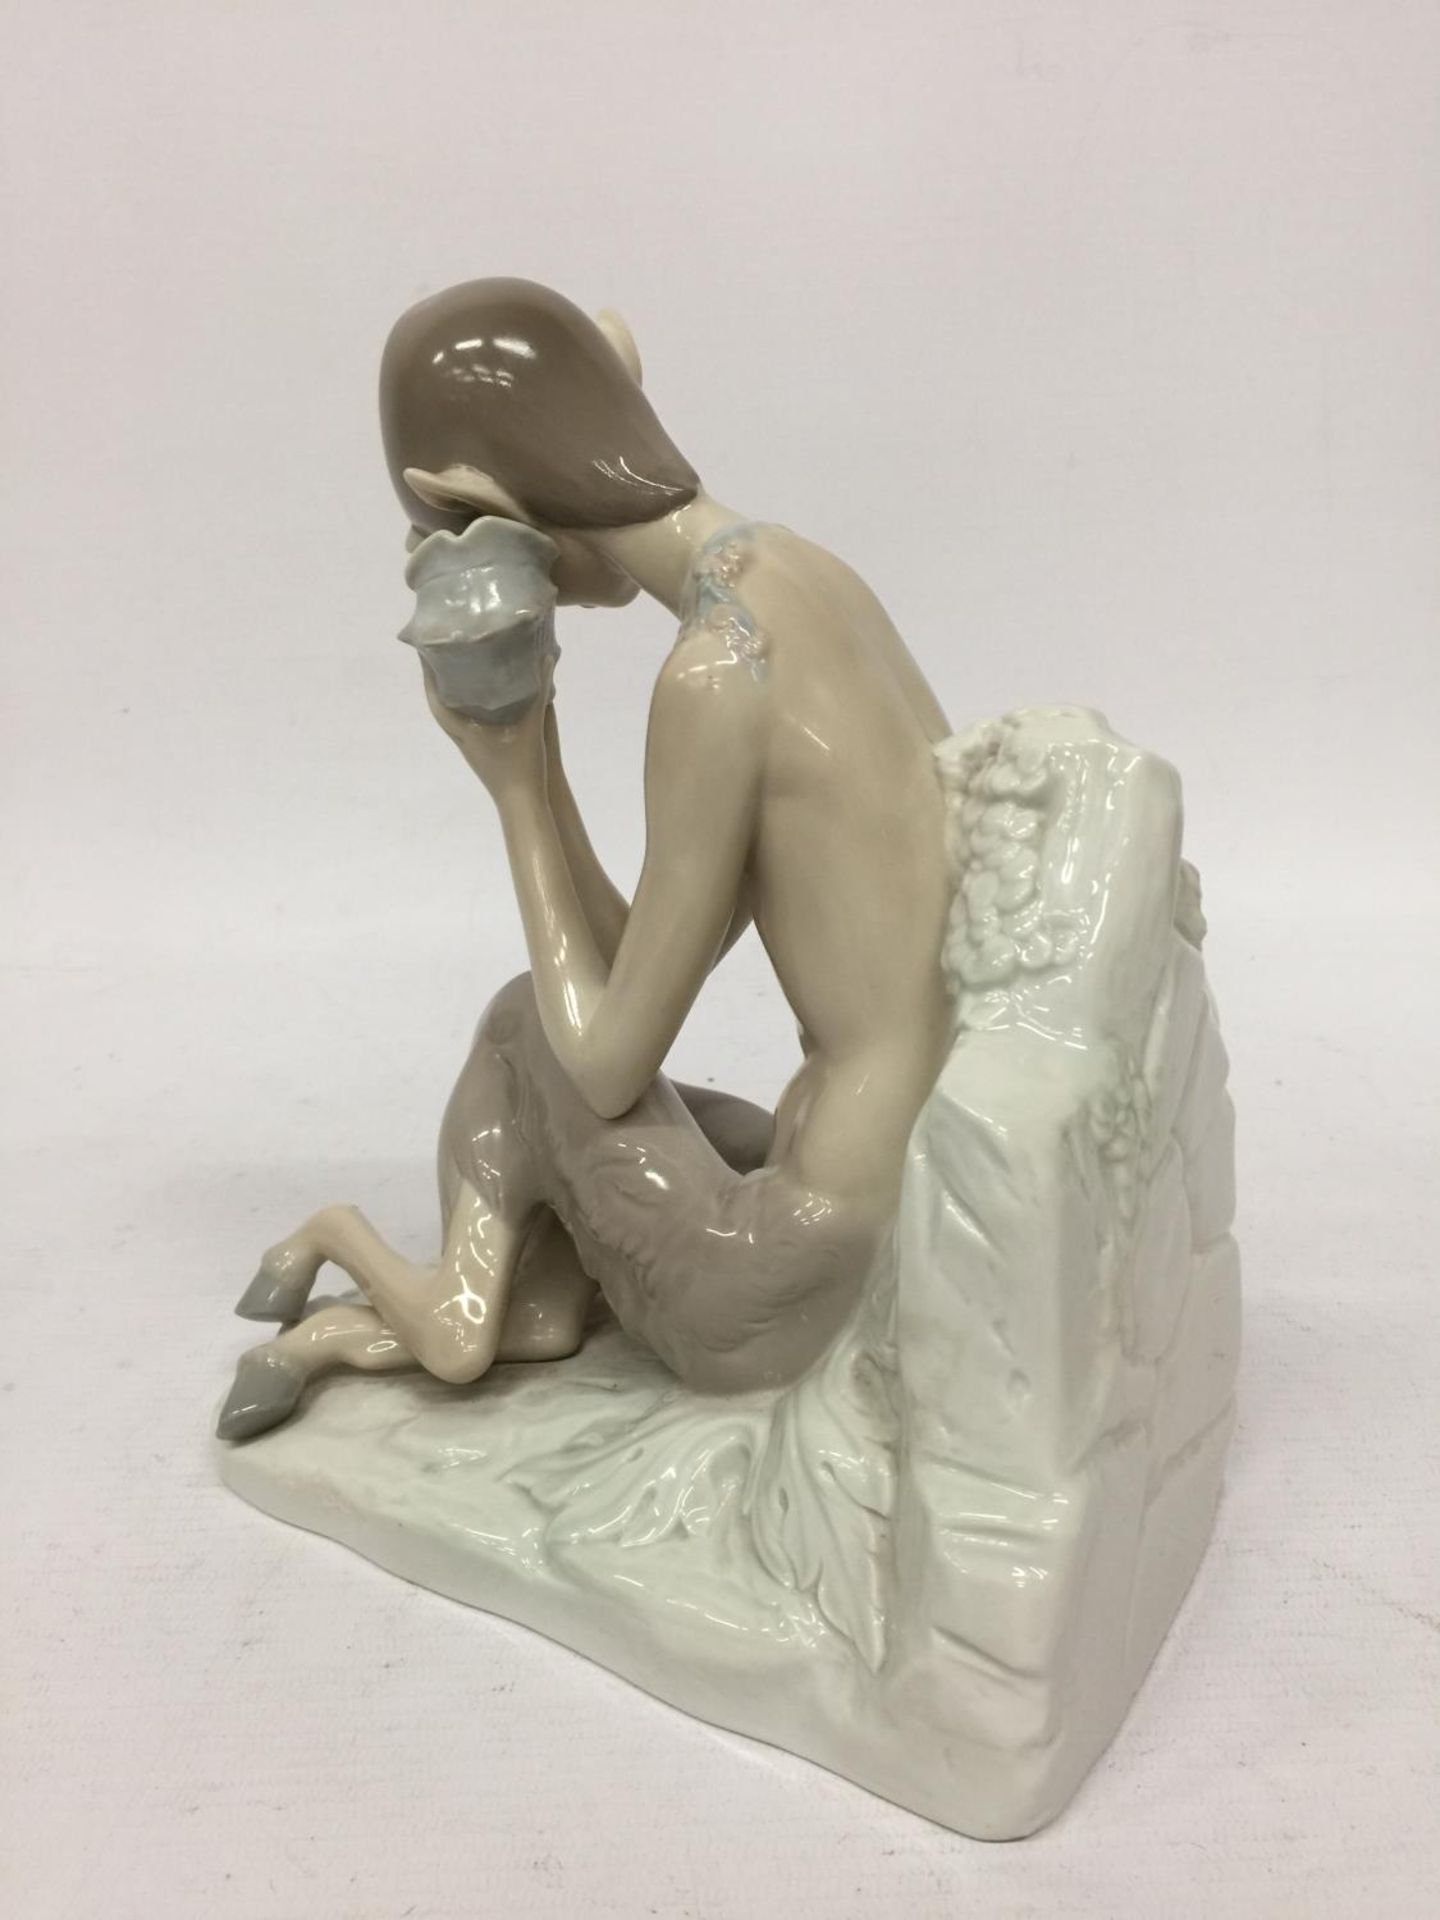 A LLADRO "SATYR WITH SNAIL" FIGURINE - 22 CM (H) 17 CM (W) - RETIRED - Image 4 of 6